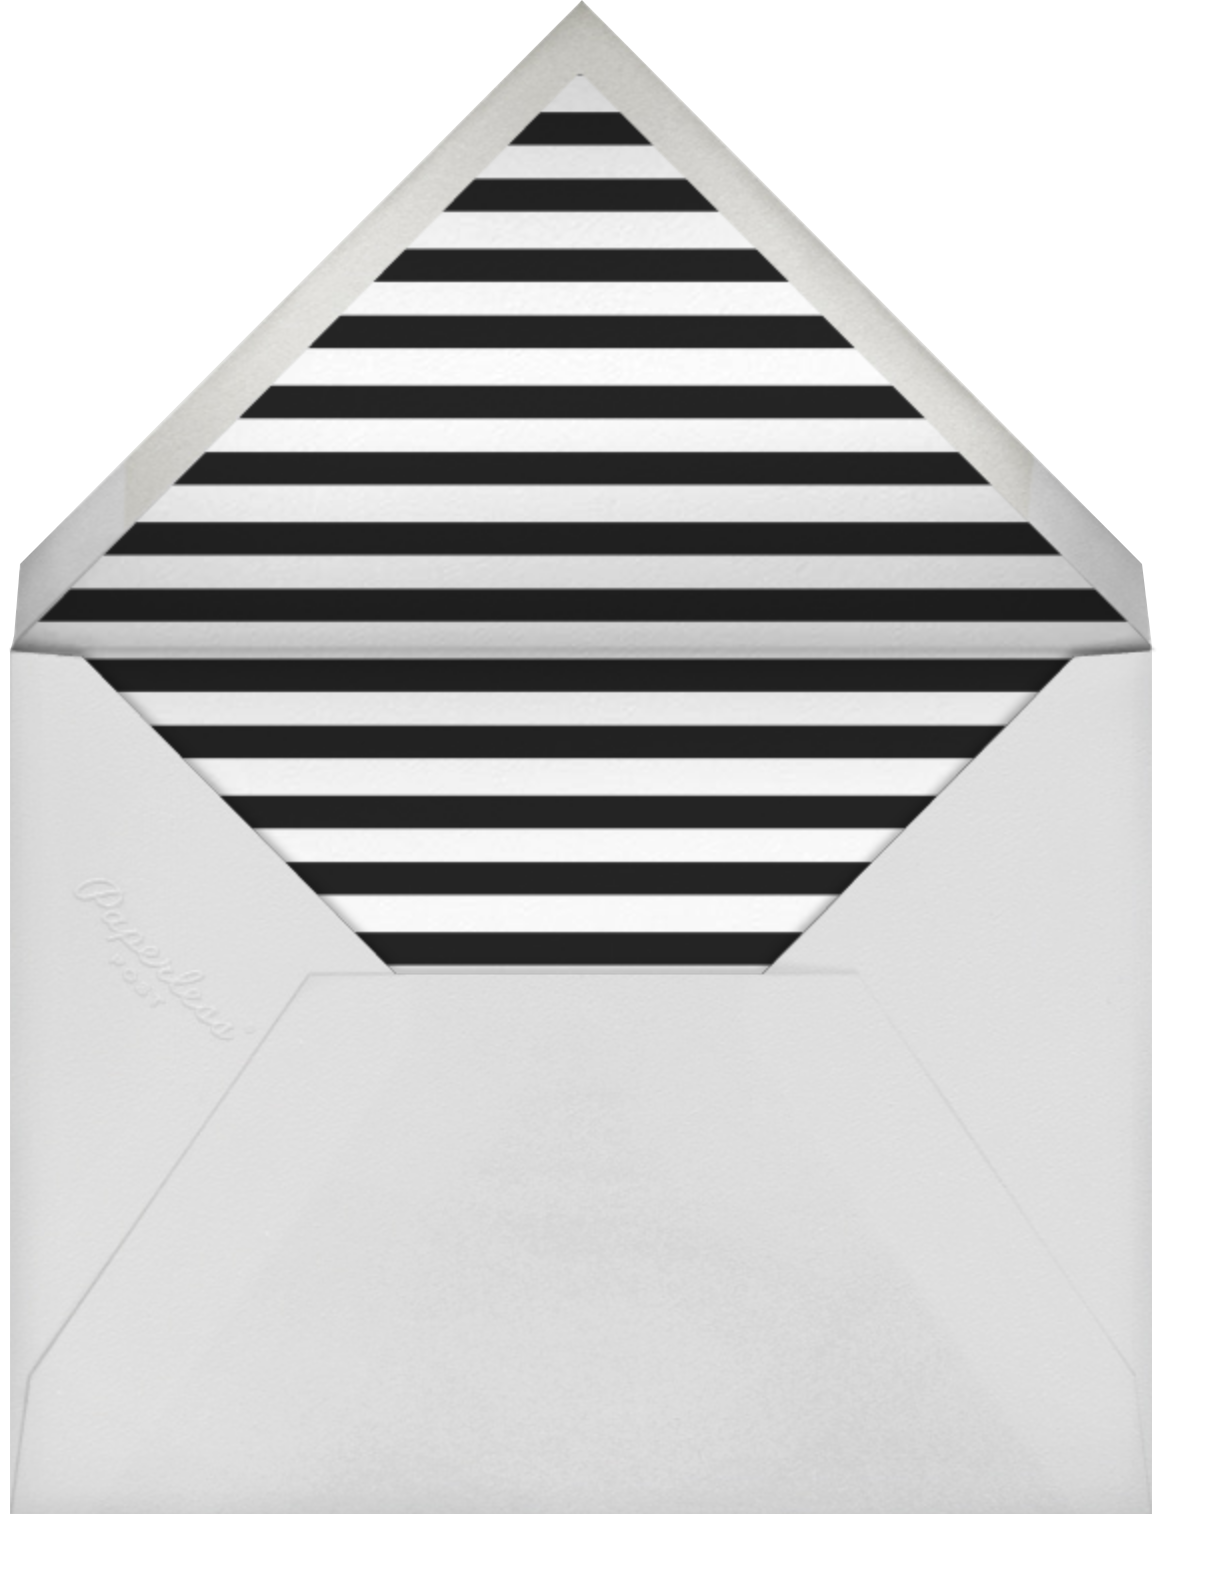 Typographic II (Photo Save the Date) - White - kate spade new york - Envelope